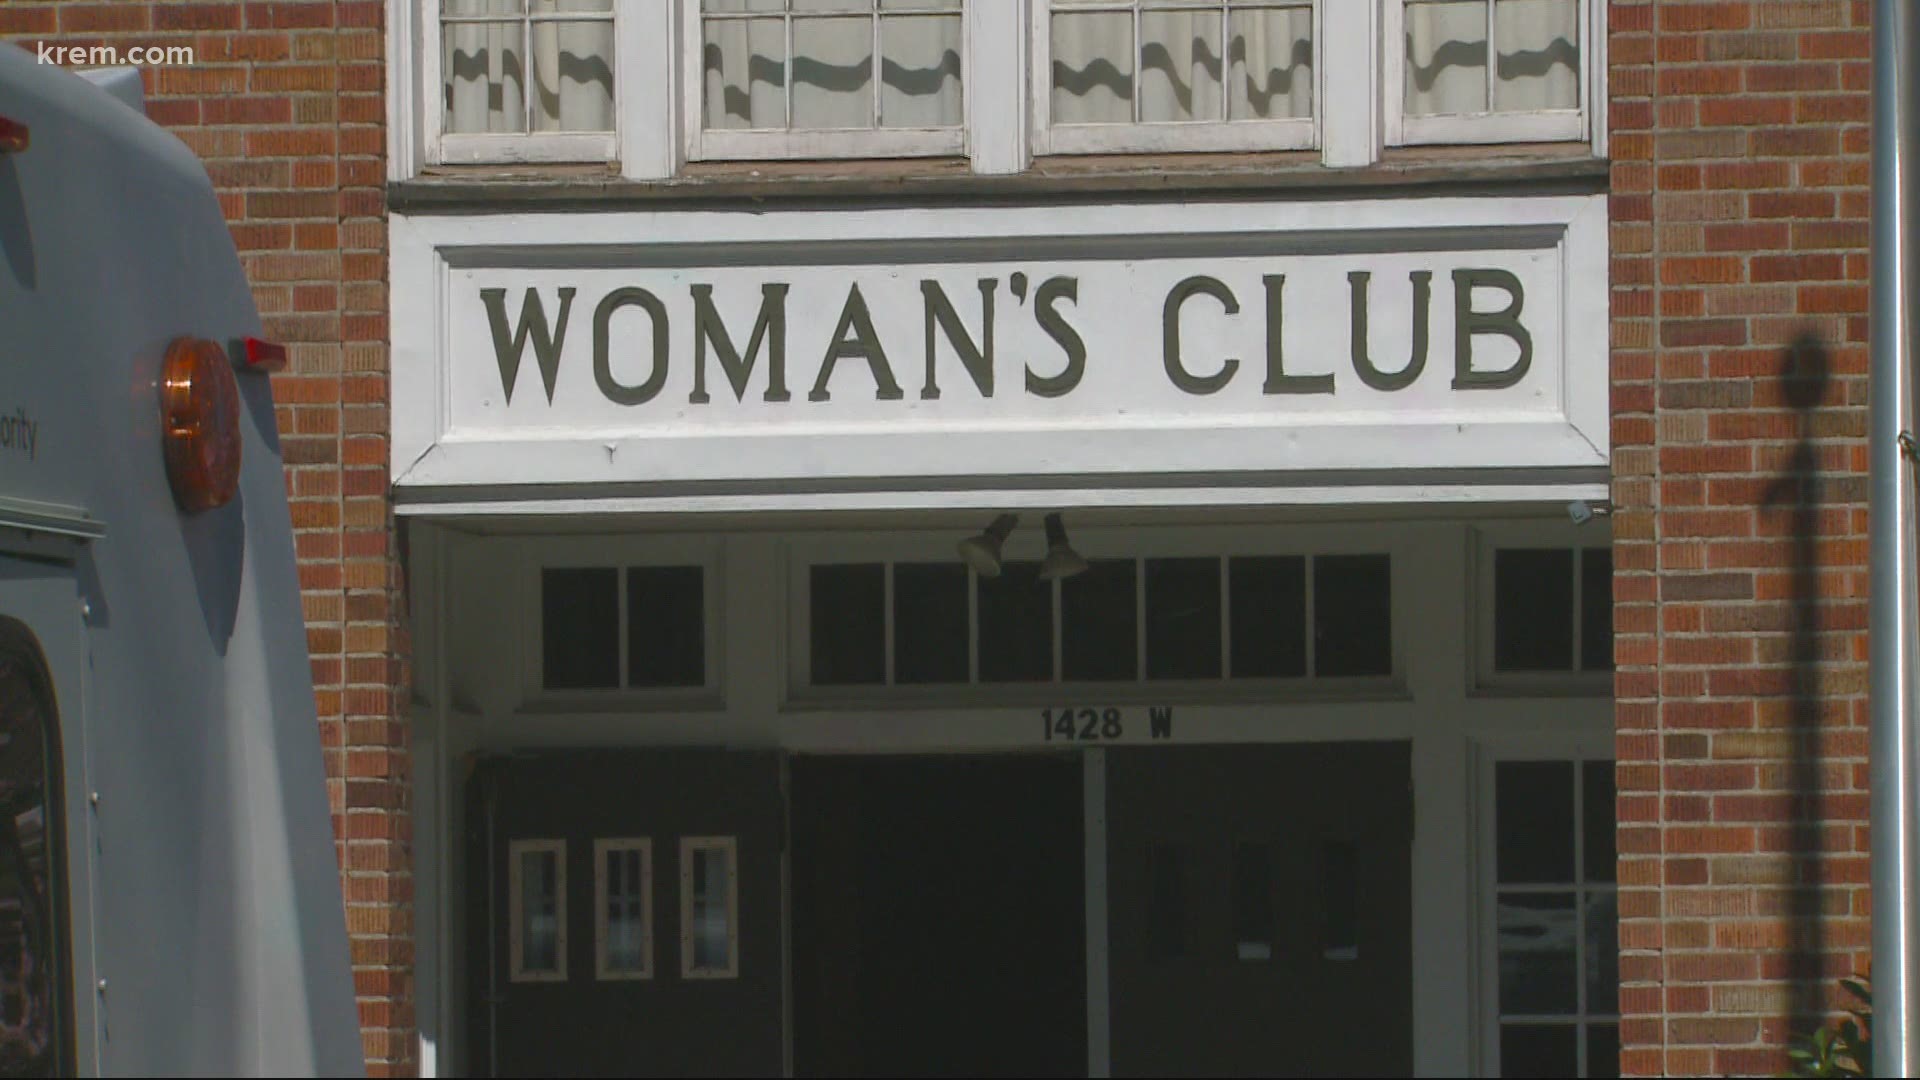 KREM's Ian Smay talked with Jewels Helping Hands and Woman's Club Spokane about the issue.